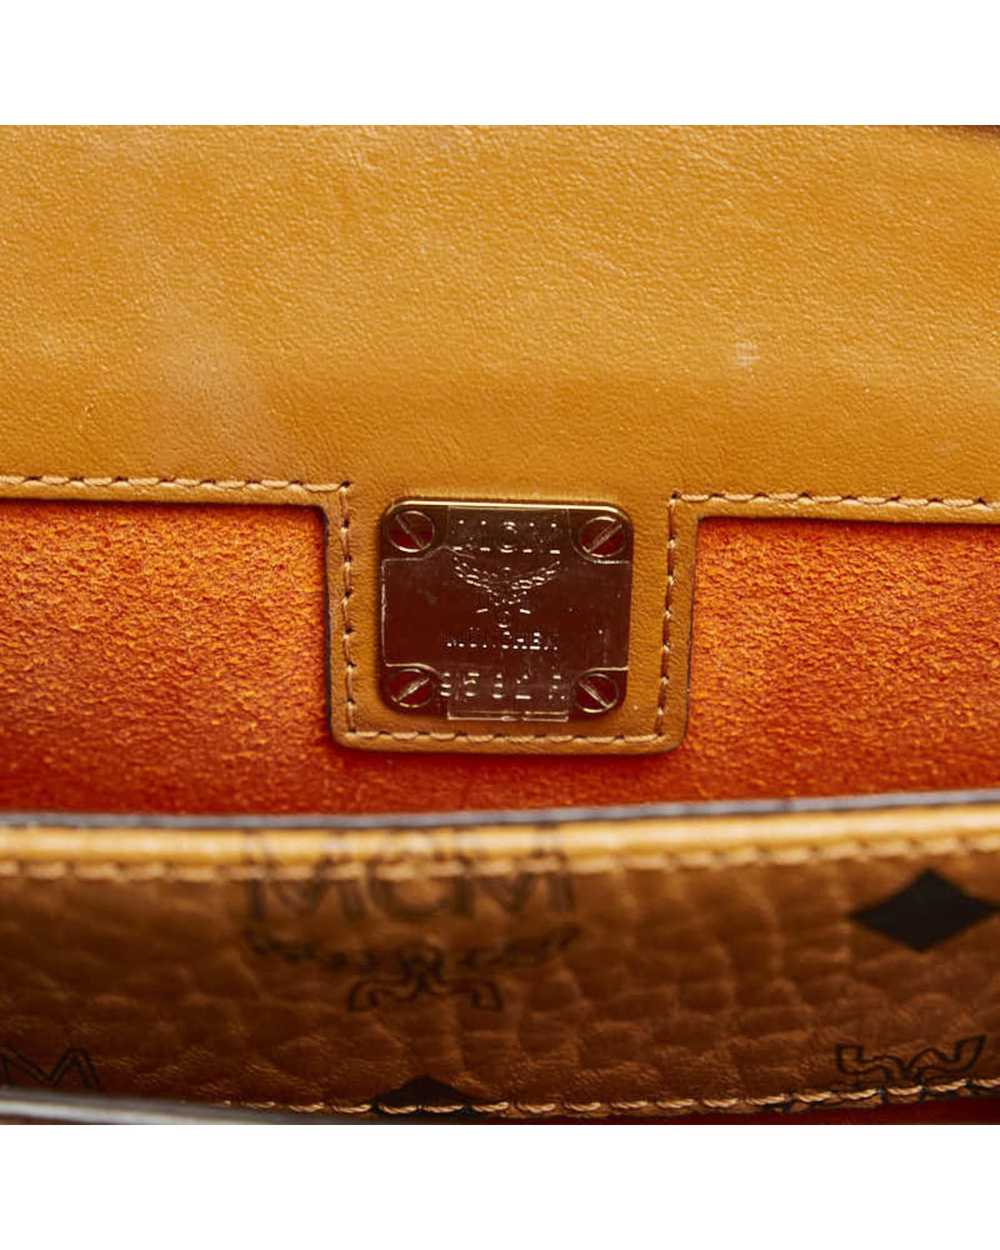 MCM Brown Leather Fanny Pack - image 6